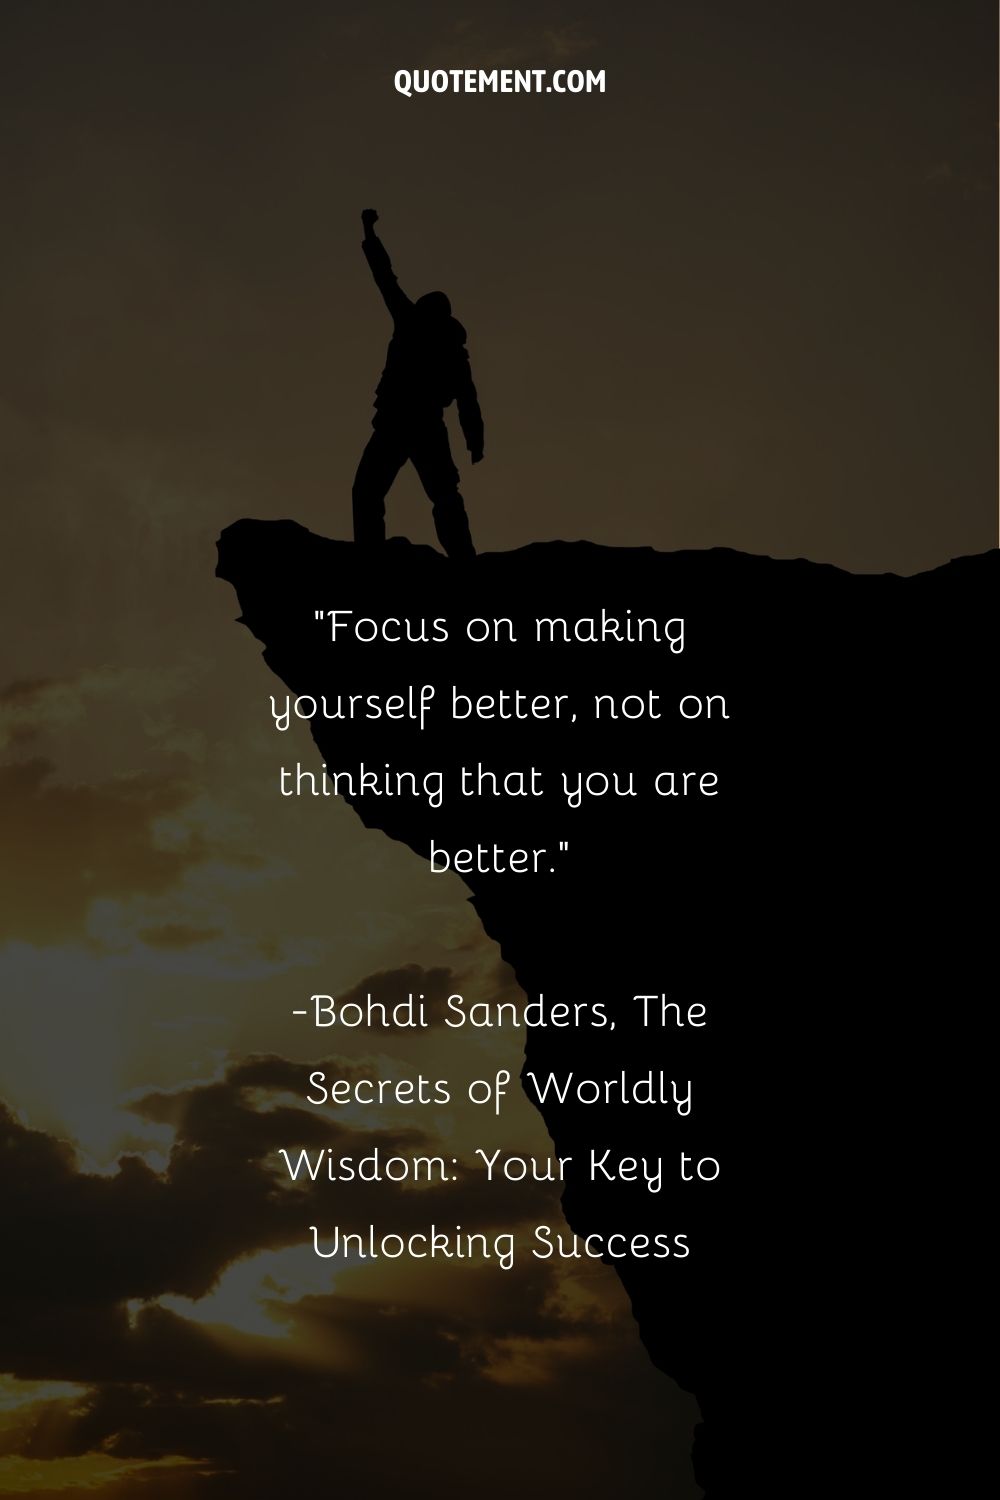 Focus on making yourself better, not on thinking that you are better.